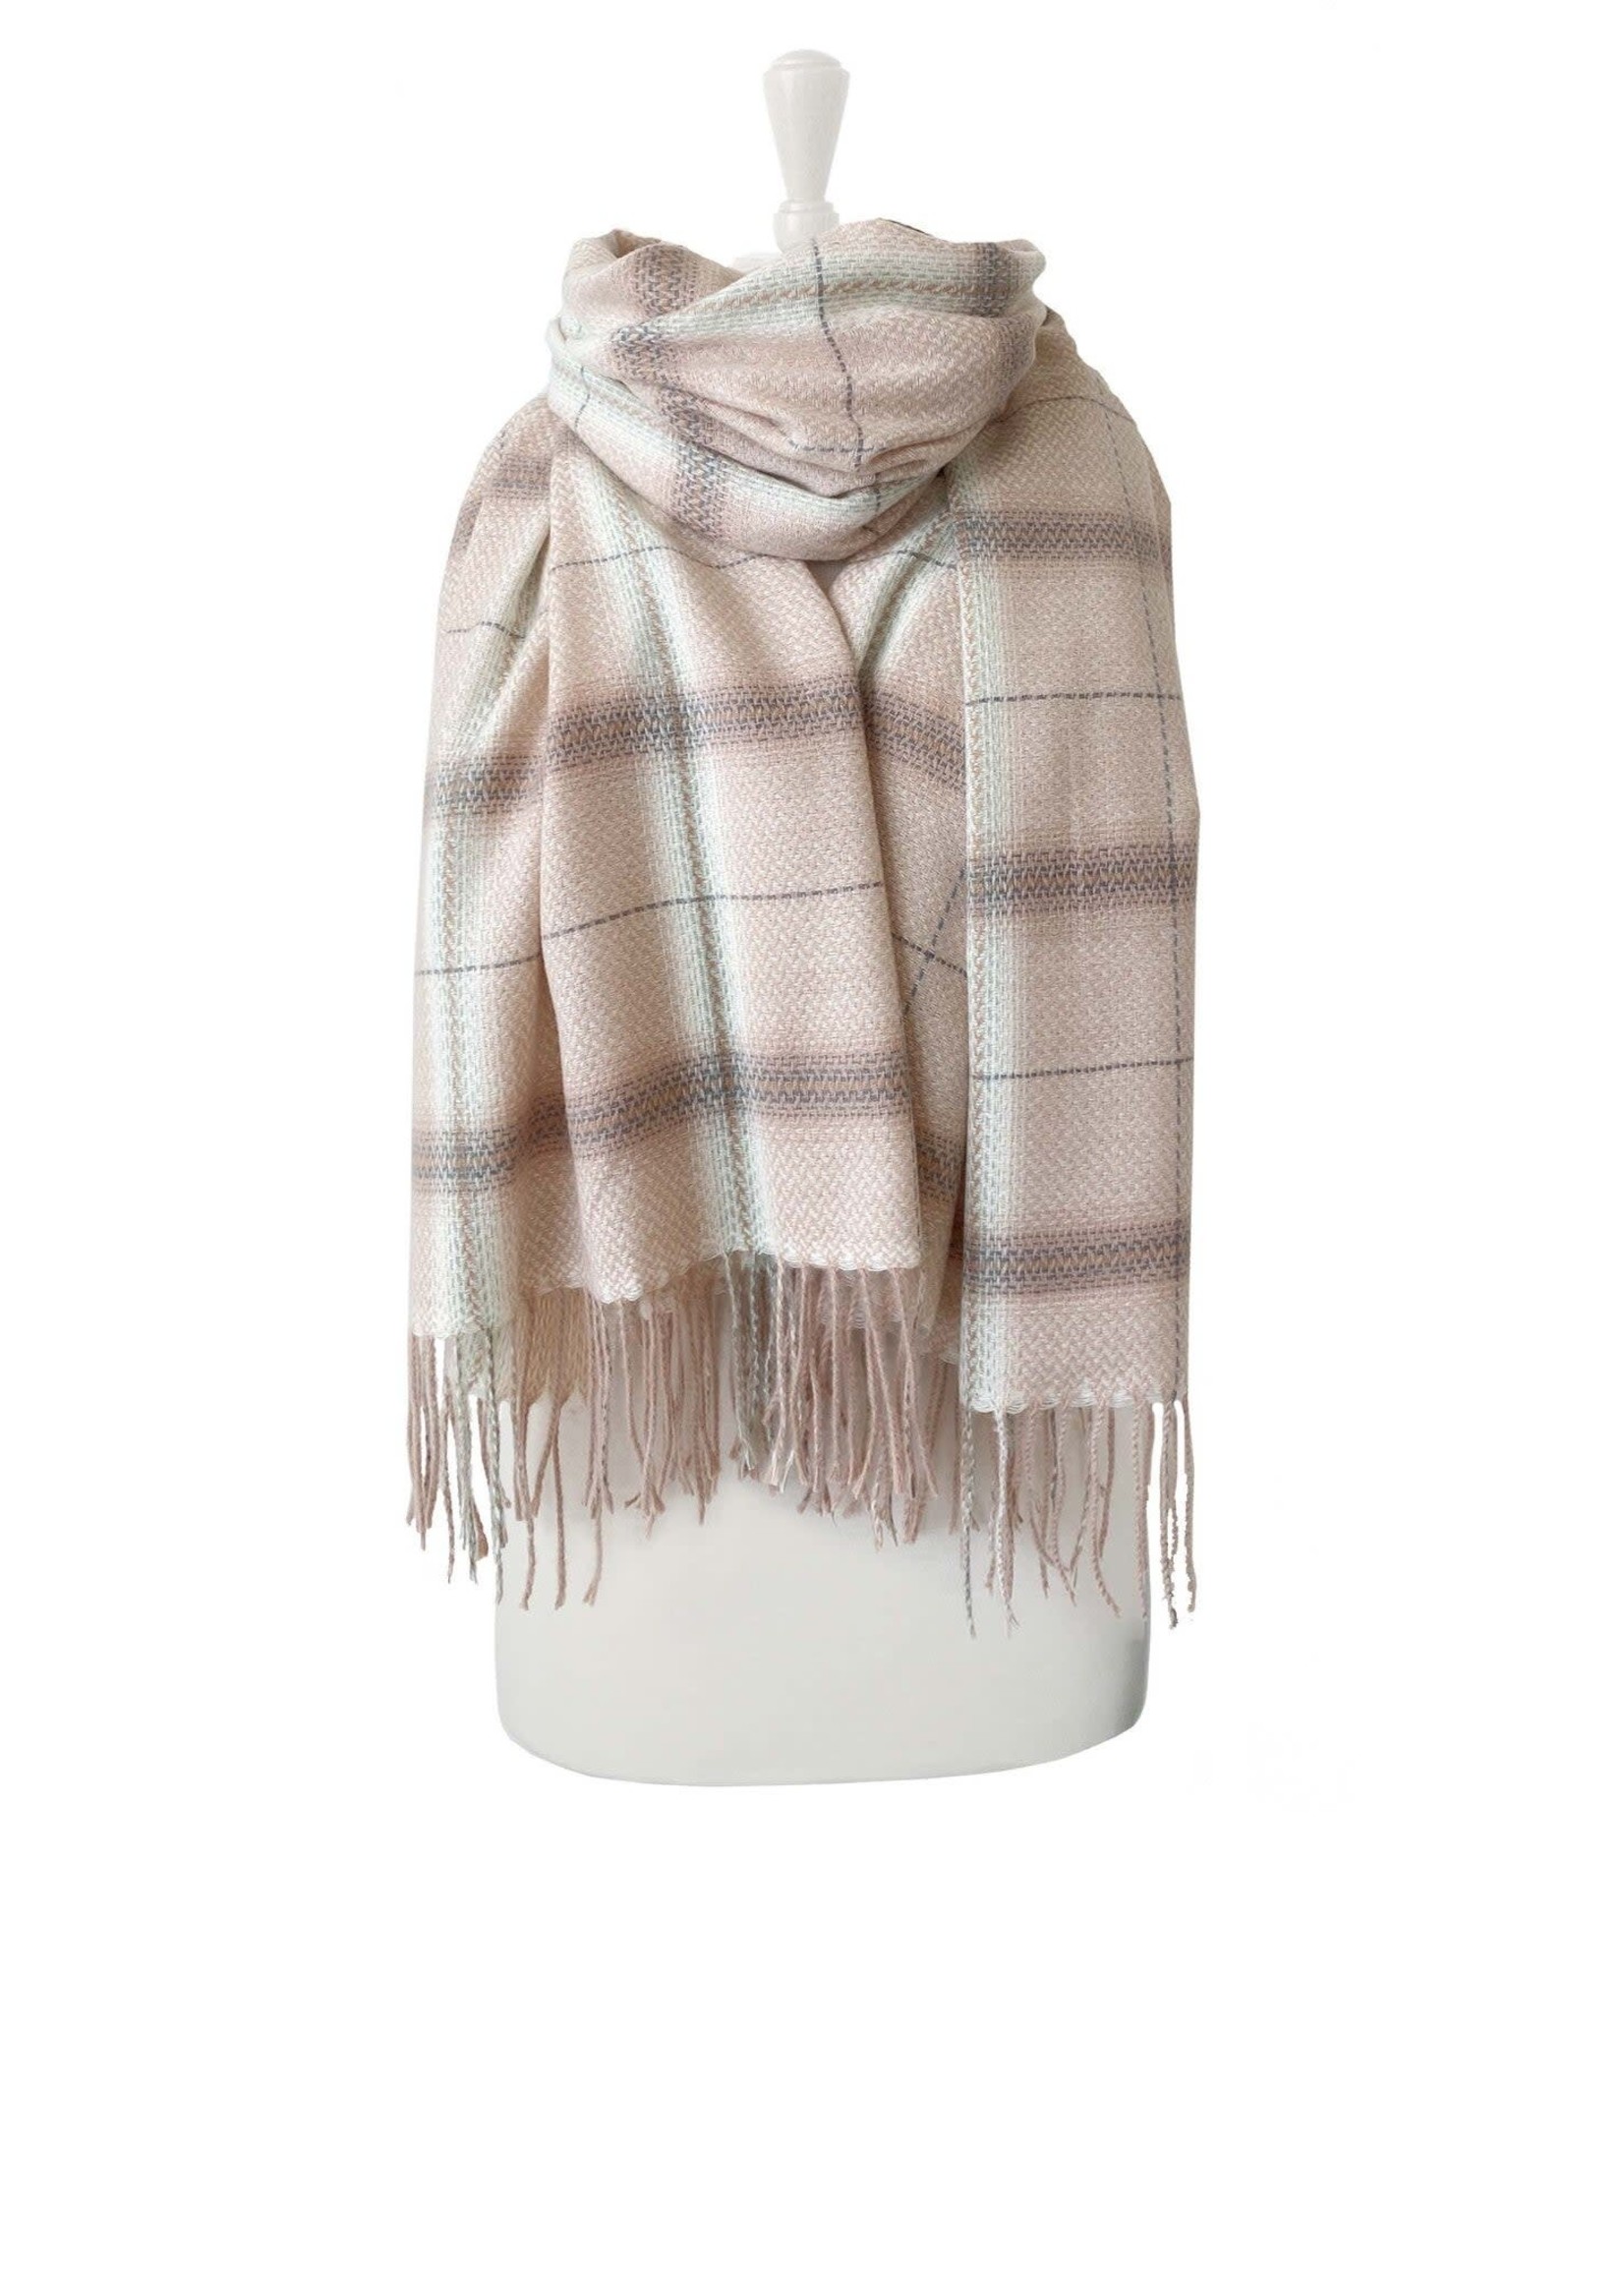 Caracol Caracol Plaid Scarf w/Fringes Pink/White/Grey 6129-PNK